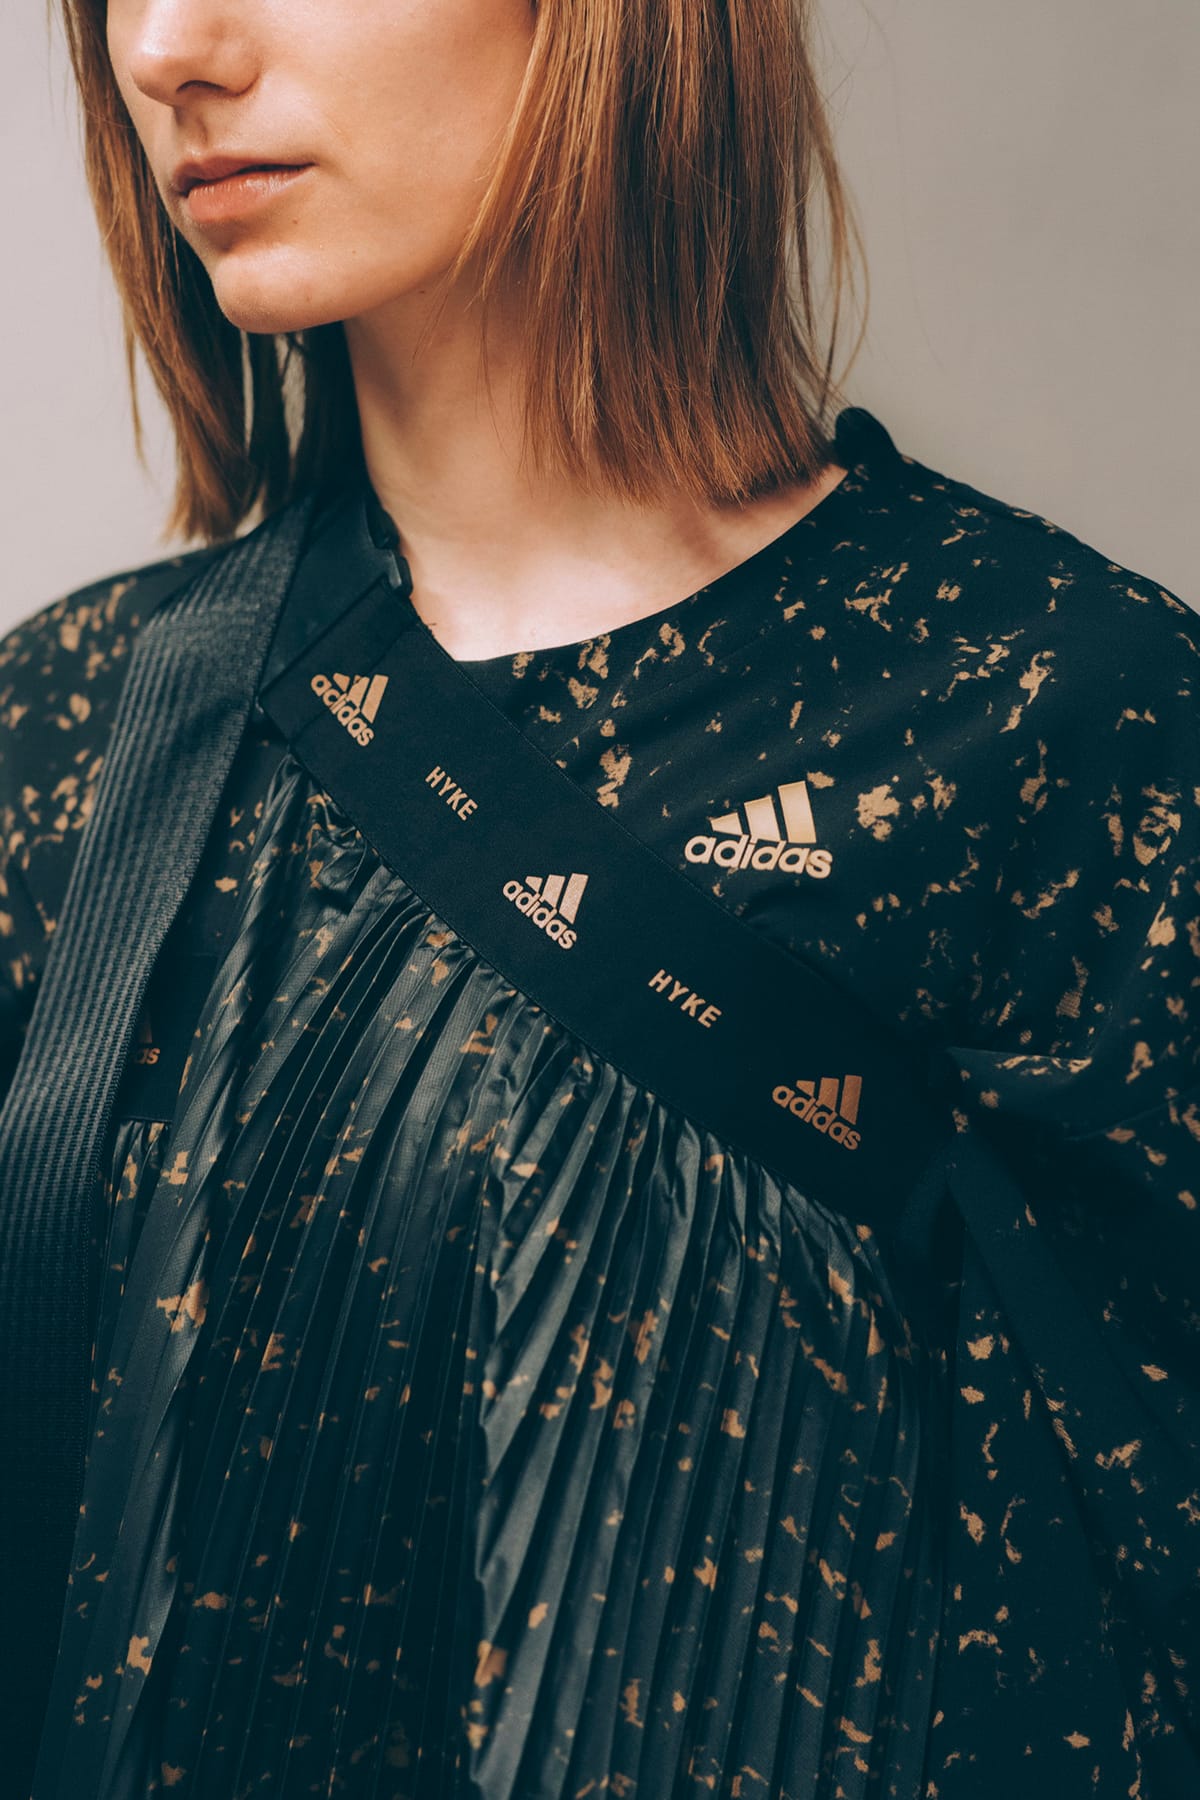 adidas new collection 2020 clothes